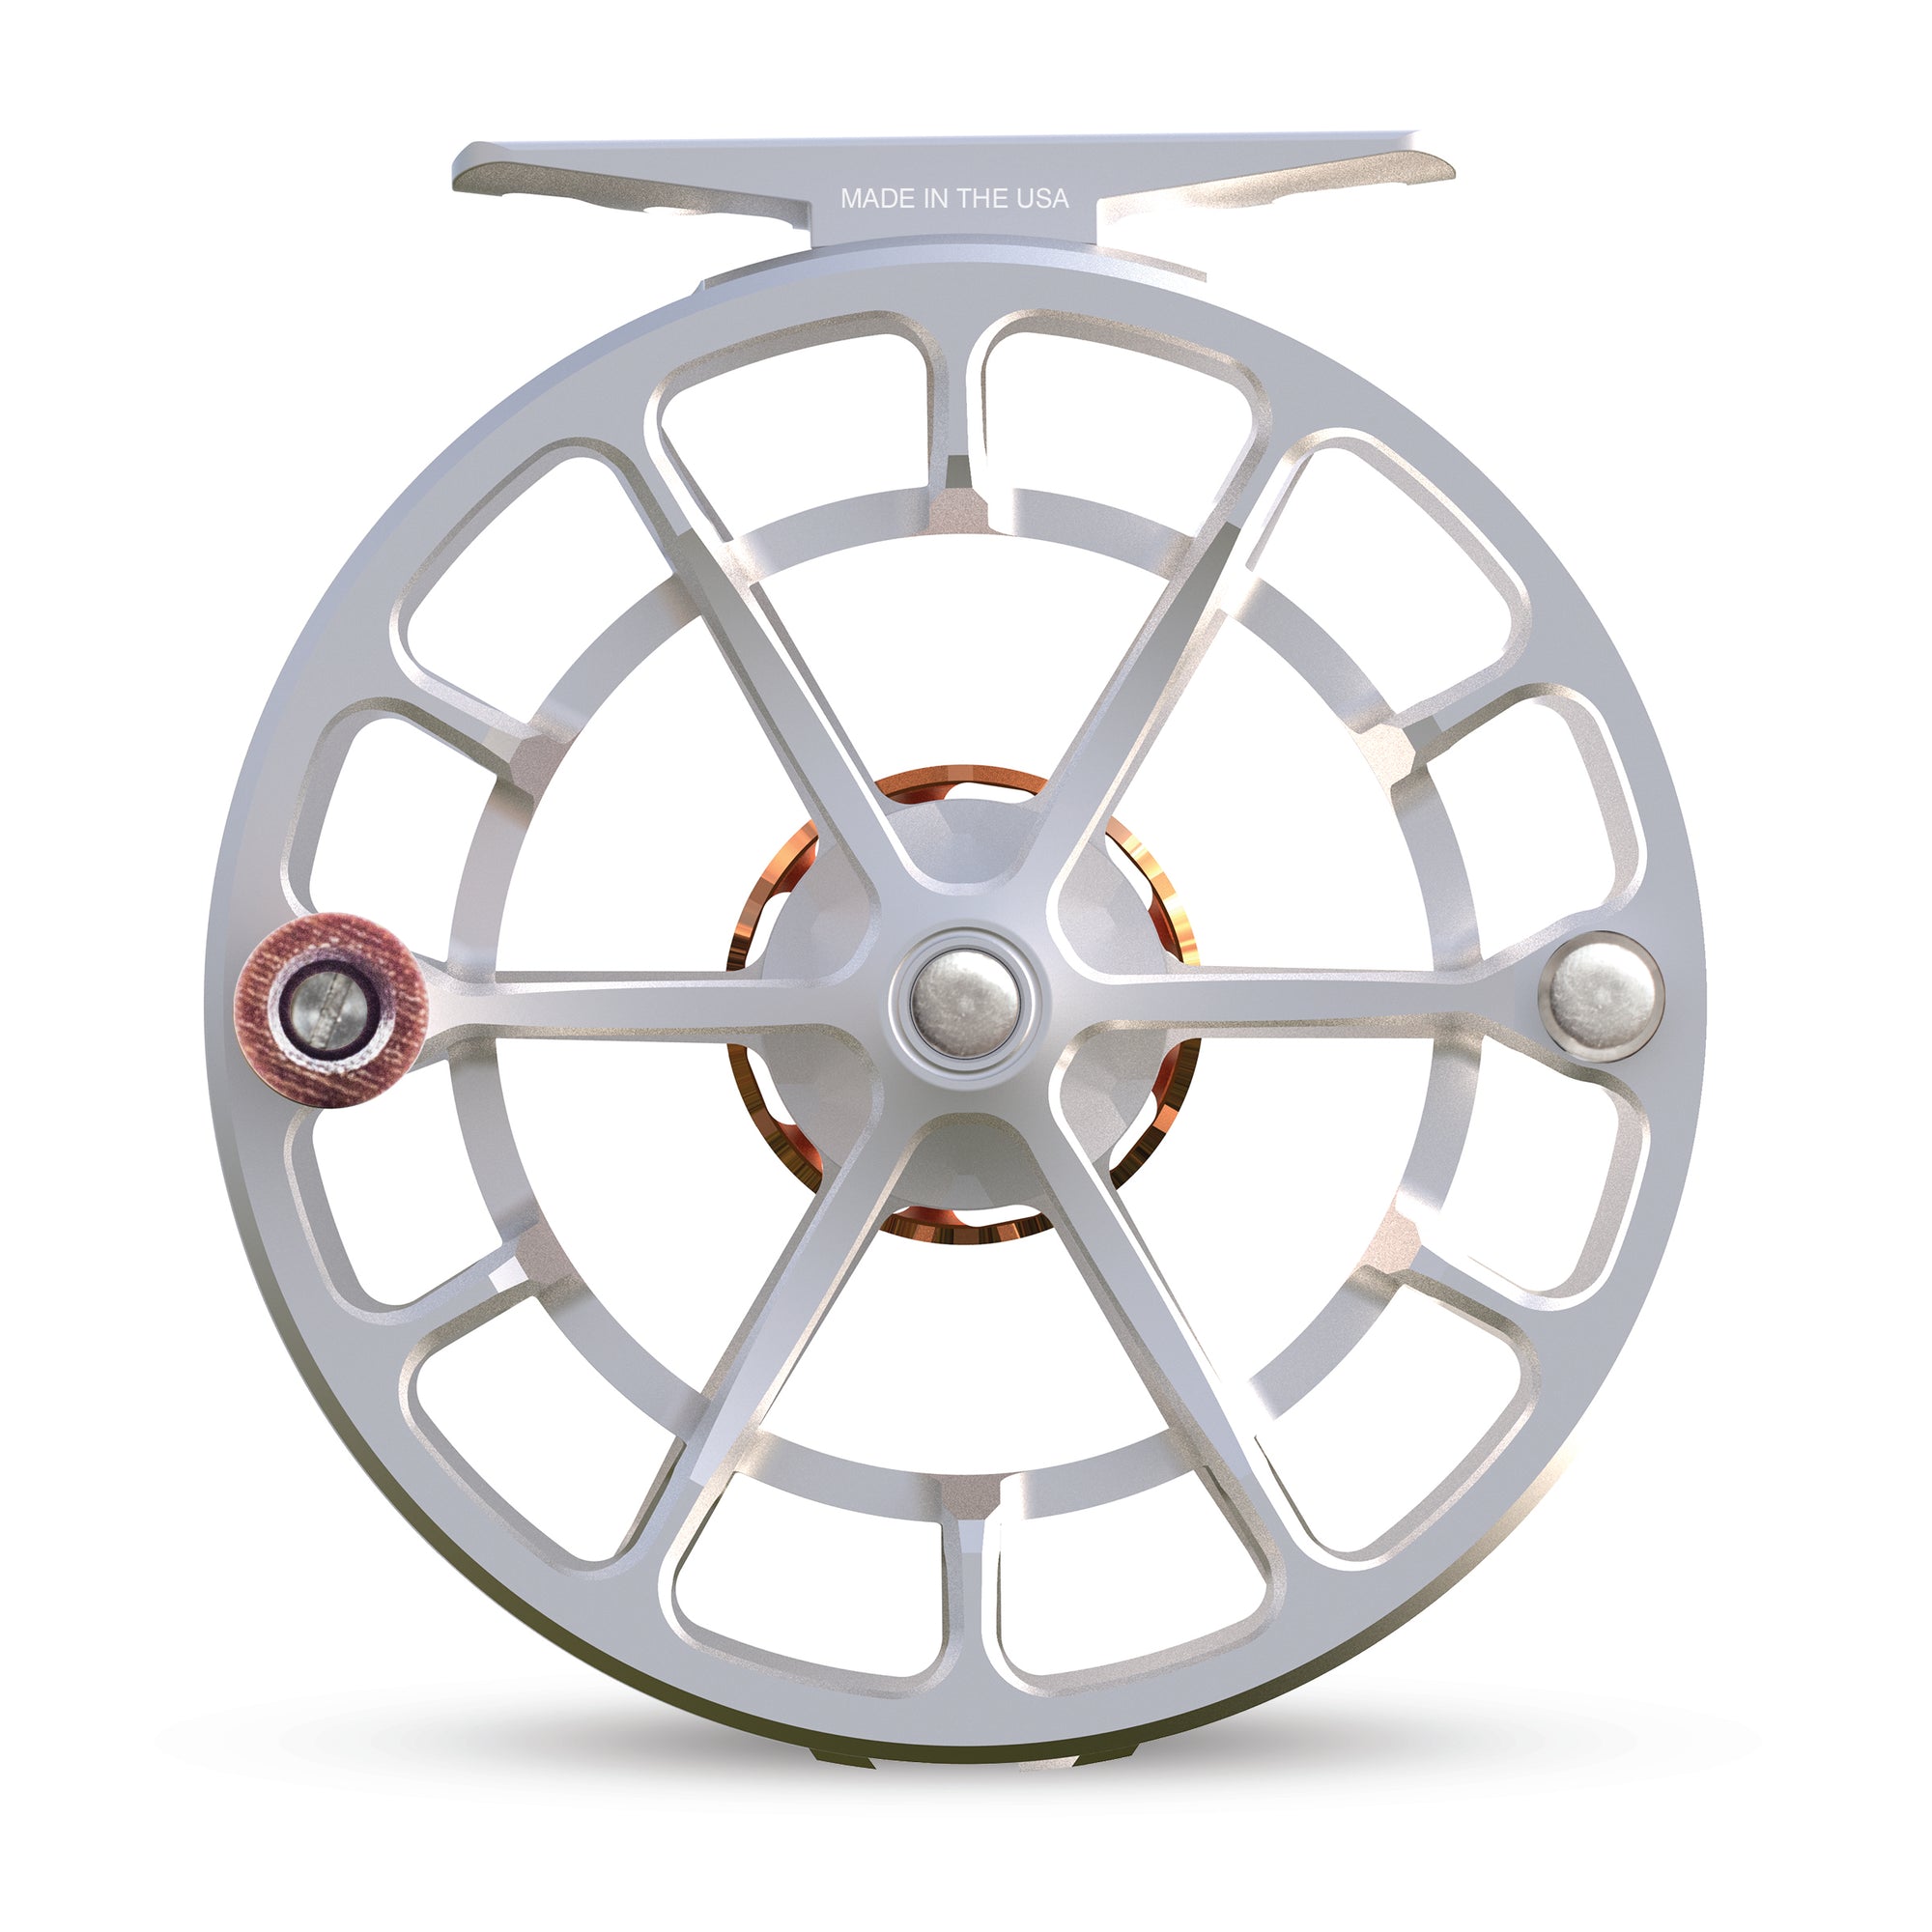 Ross Reels - Evolution LTX can do it all! Its the perfect trout